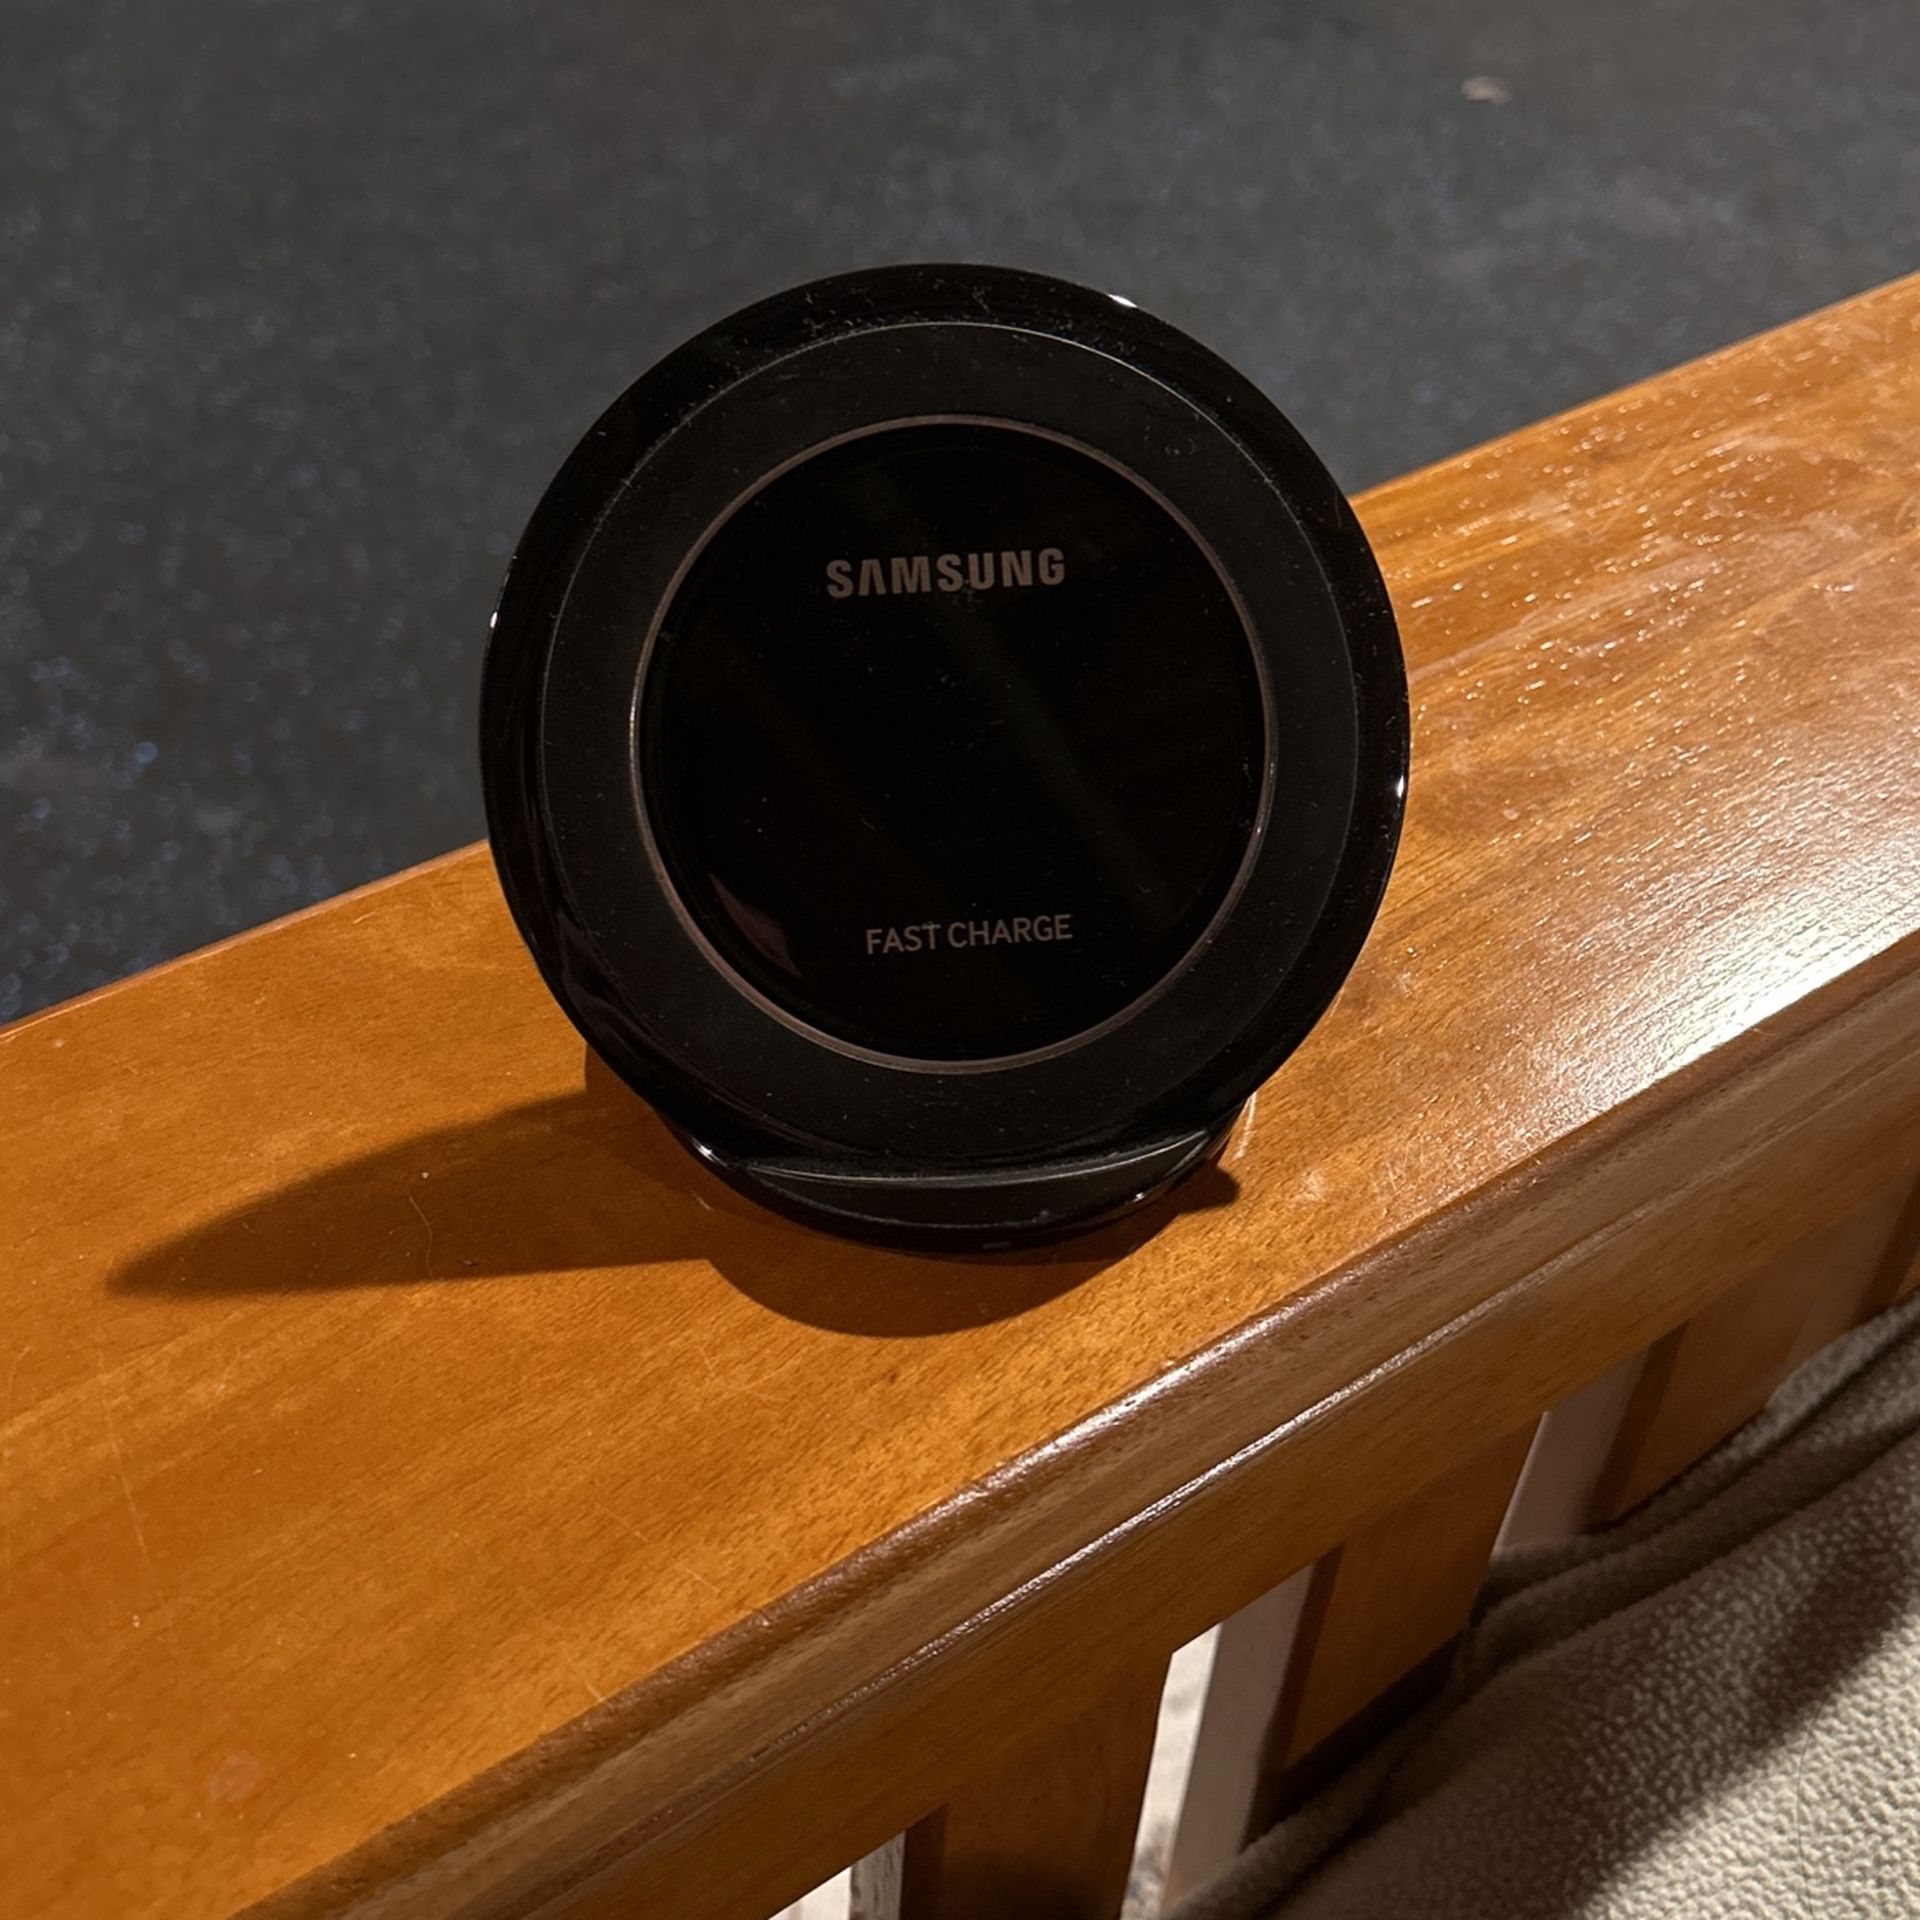 Samsung Wireless Charger (Works With Apple Devices)